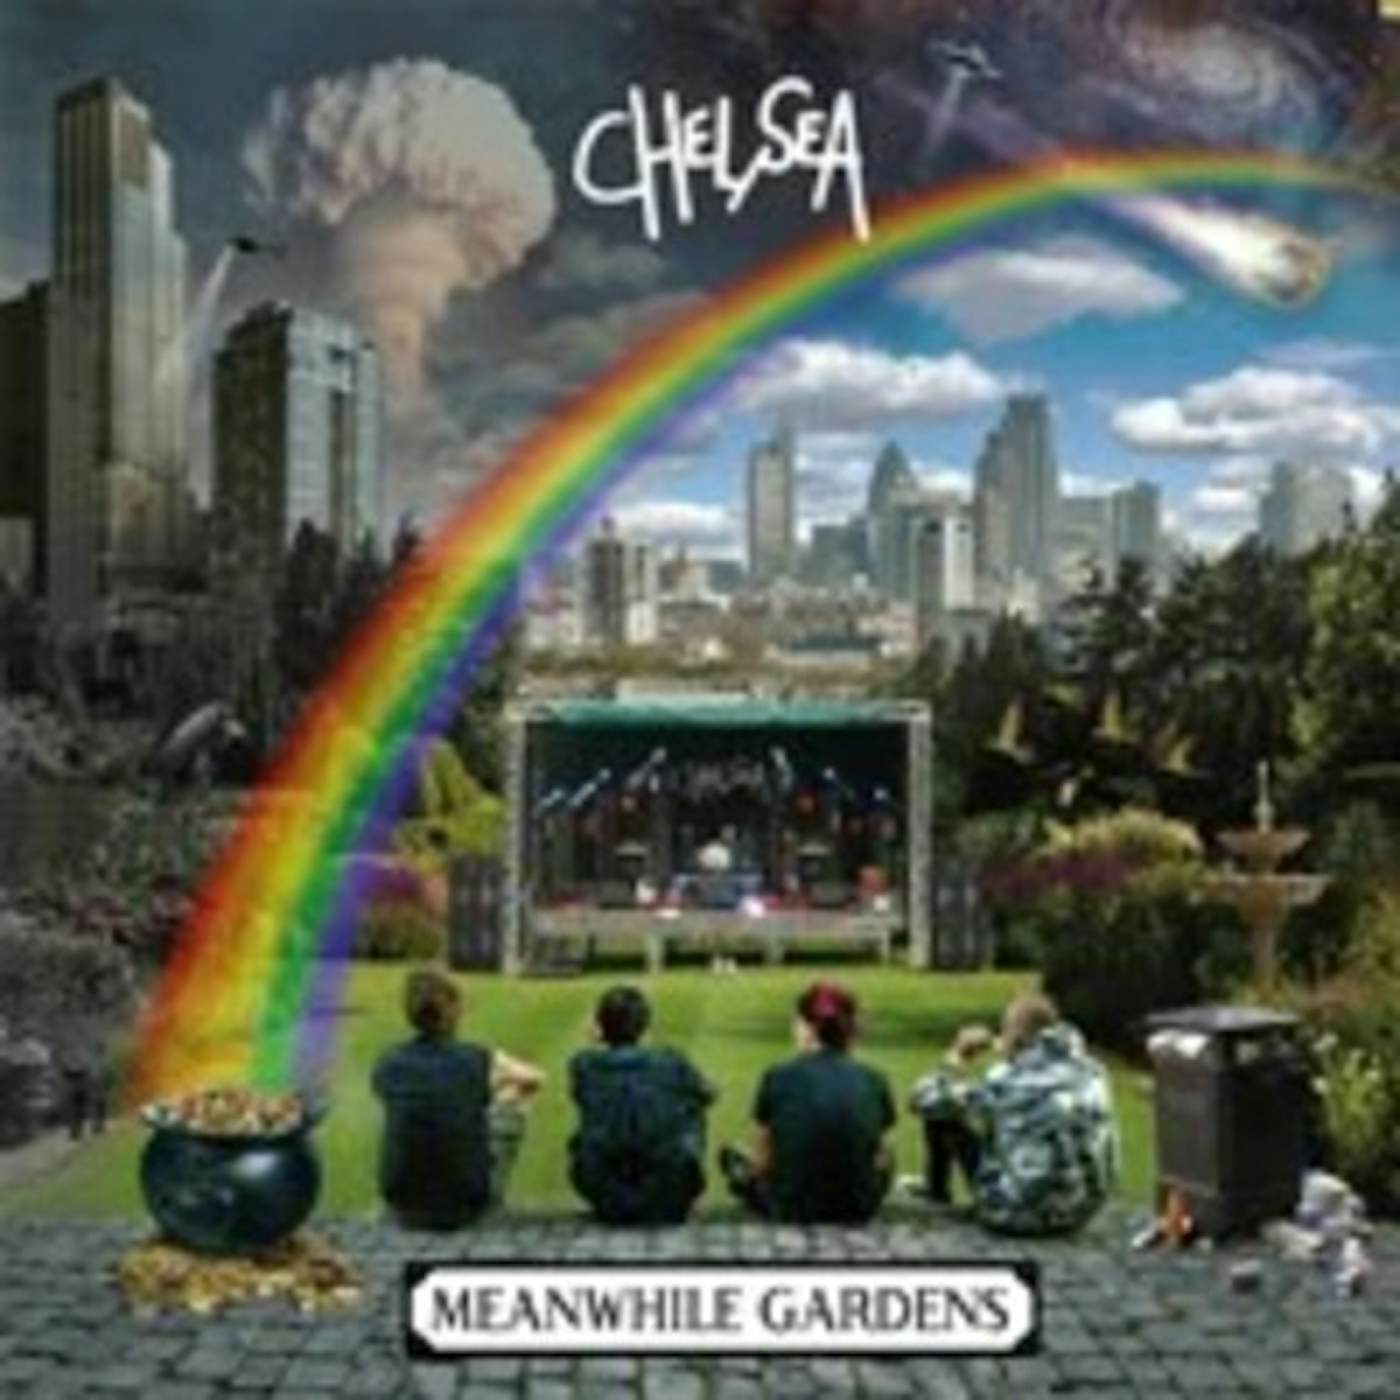 Chelsea MEANWHILE GARDENS CD